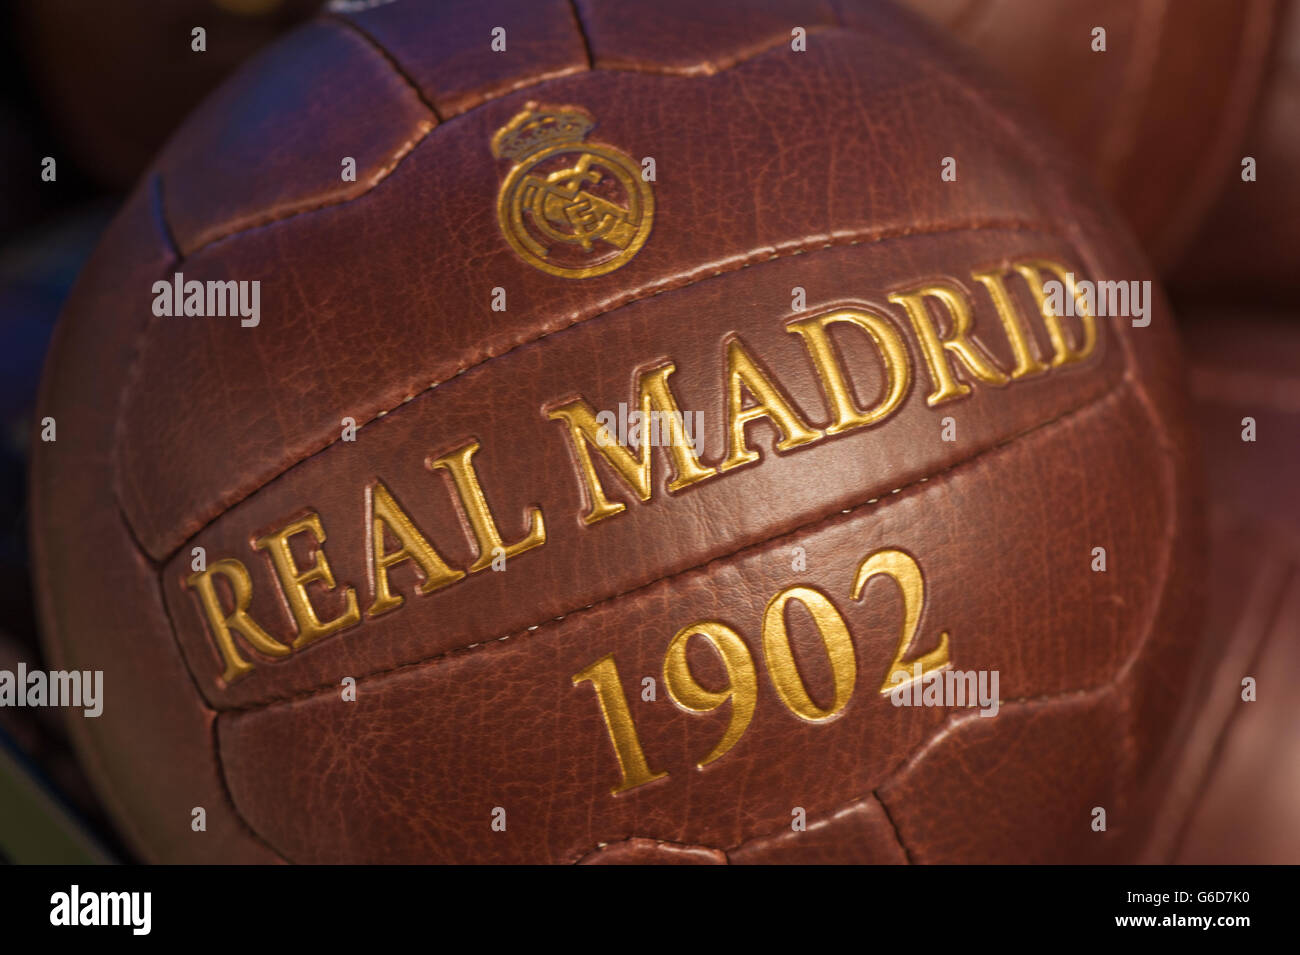 Madrid Football Mania Shopping Editorial Image - Image of famous, ball:  64002120